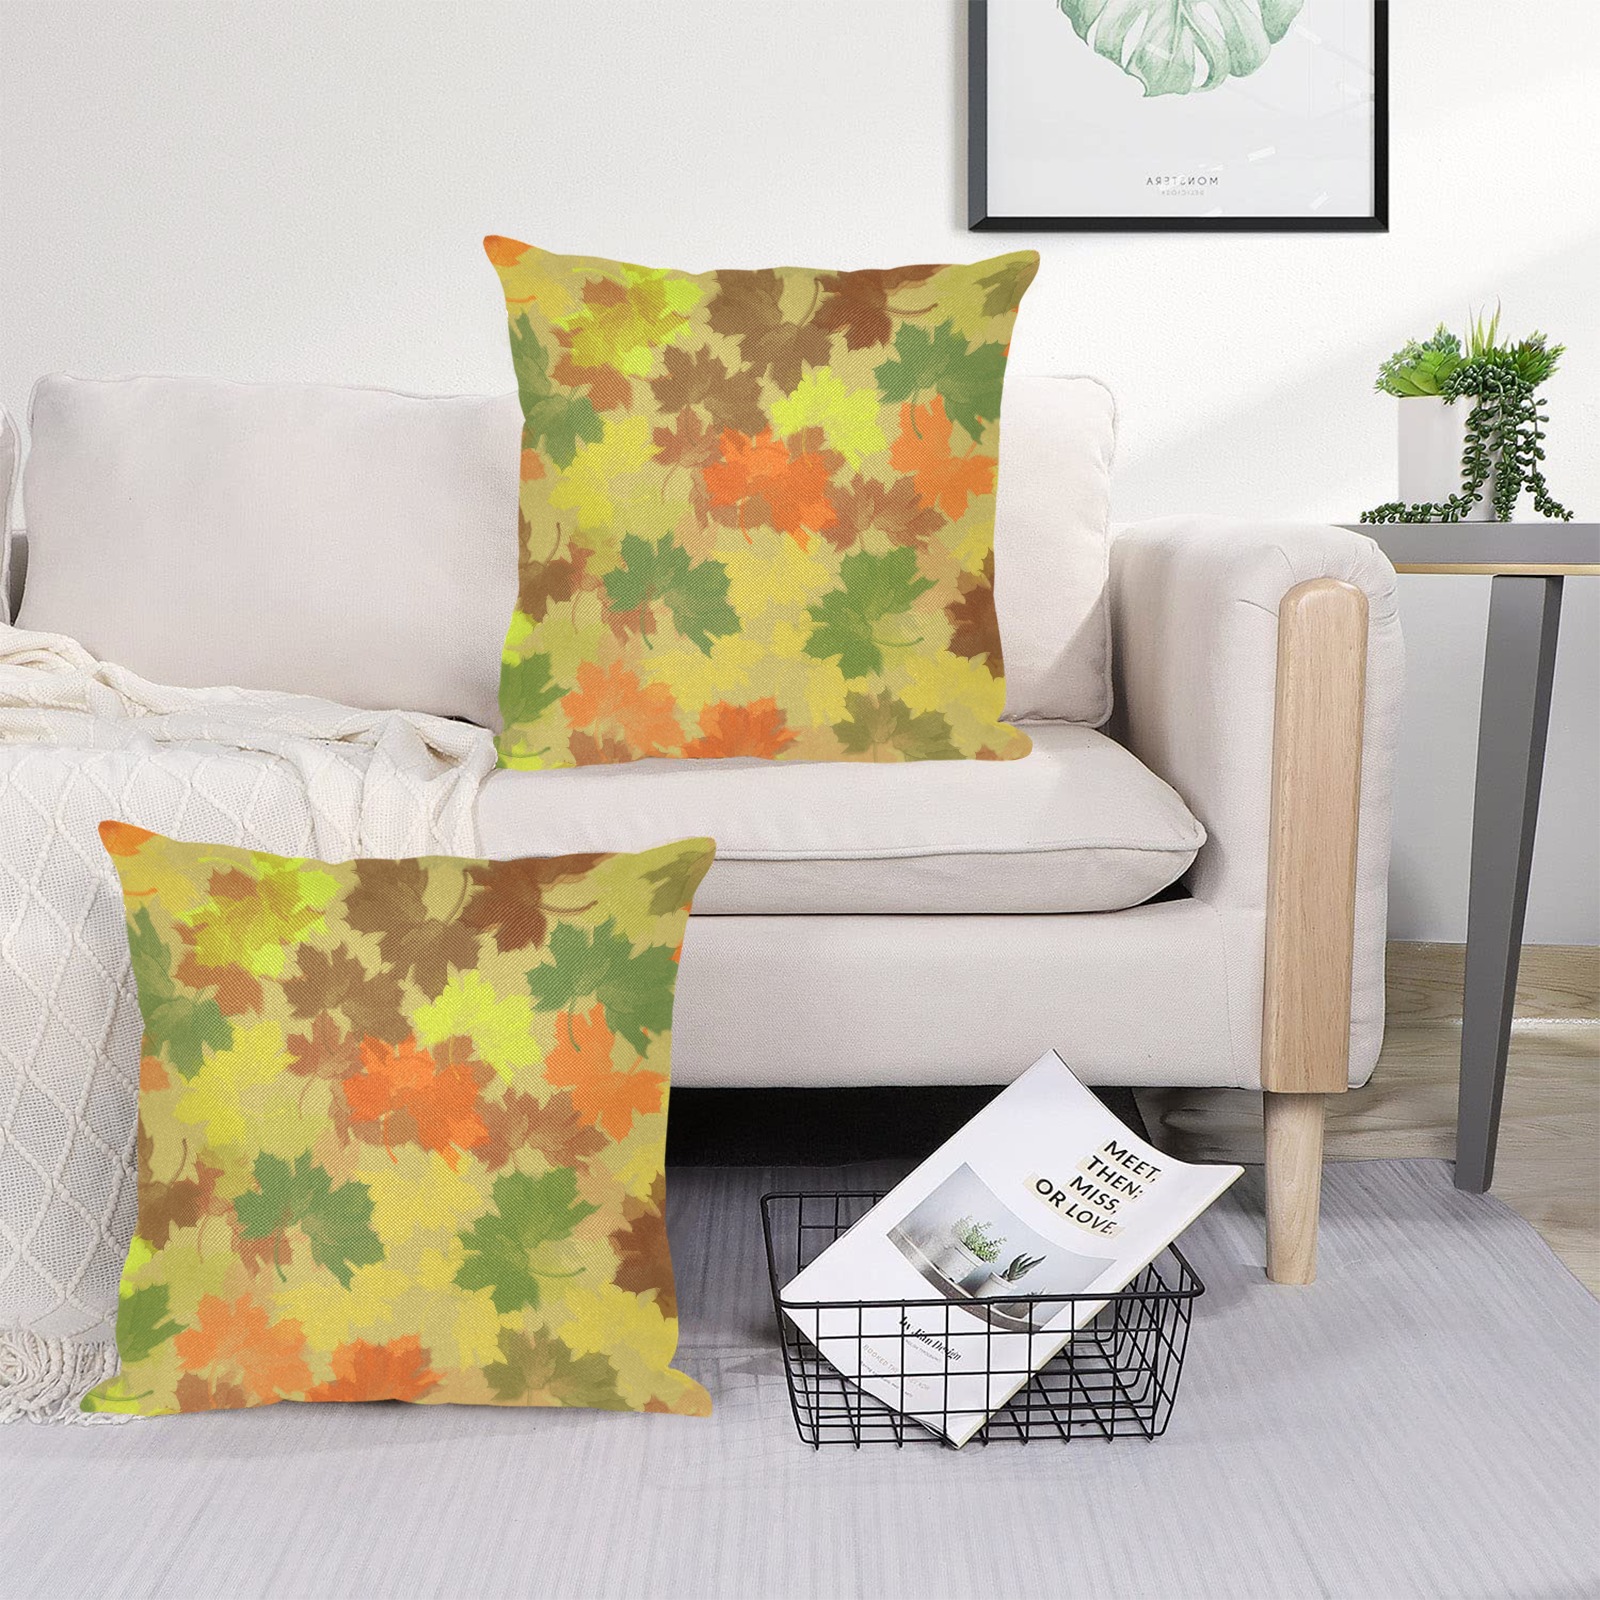 Autumn Leaves / Fall Leaves Linen Zippered Pillowcase 18"x18"(Two Sides&Pack of 2)